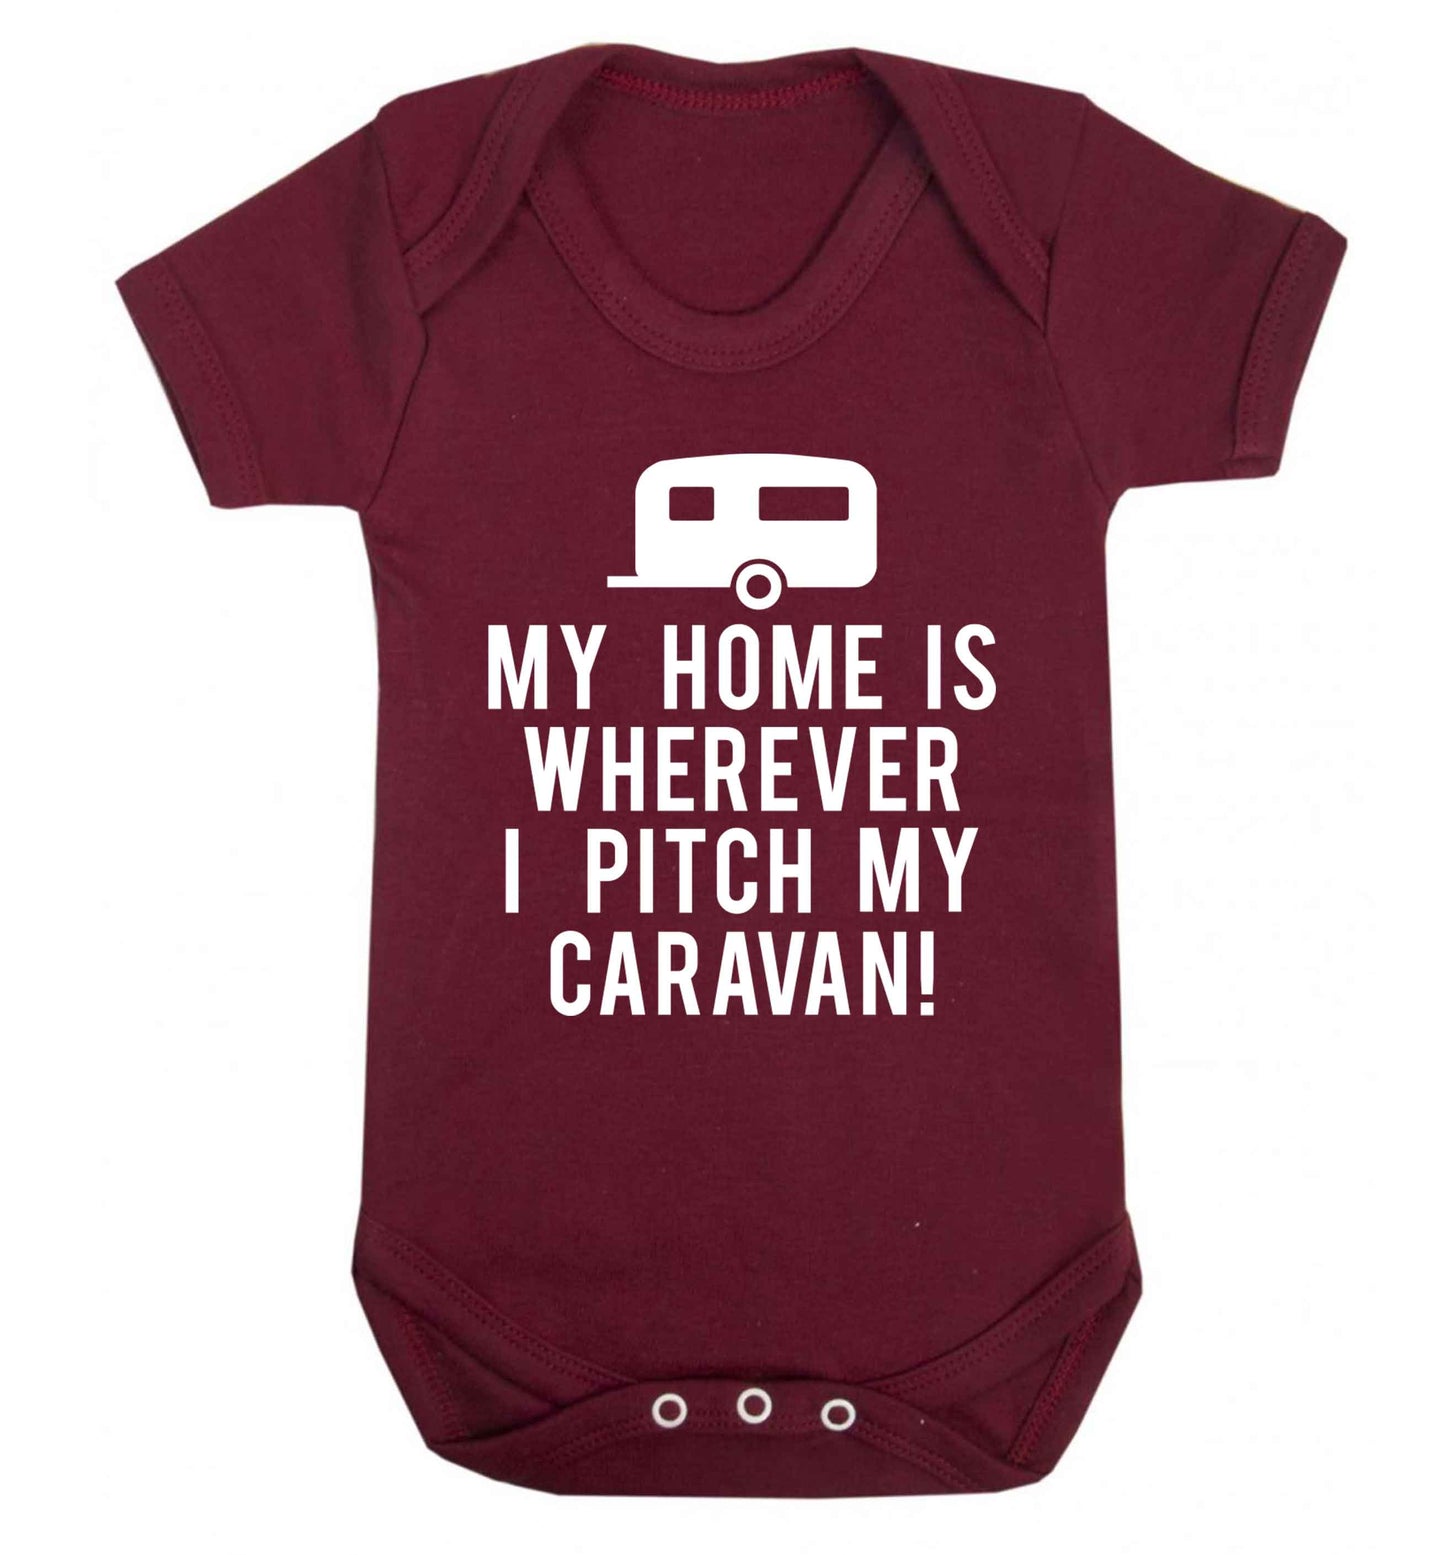 My home is wherever I pitch my caravan Baby Vest maroon 18-24 months